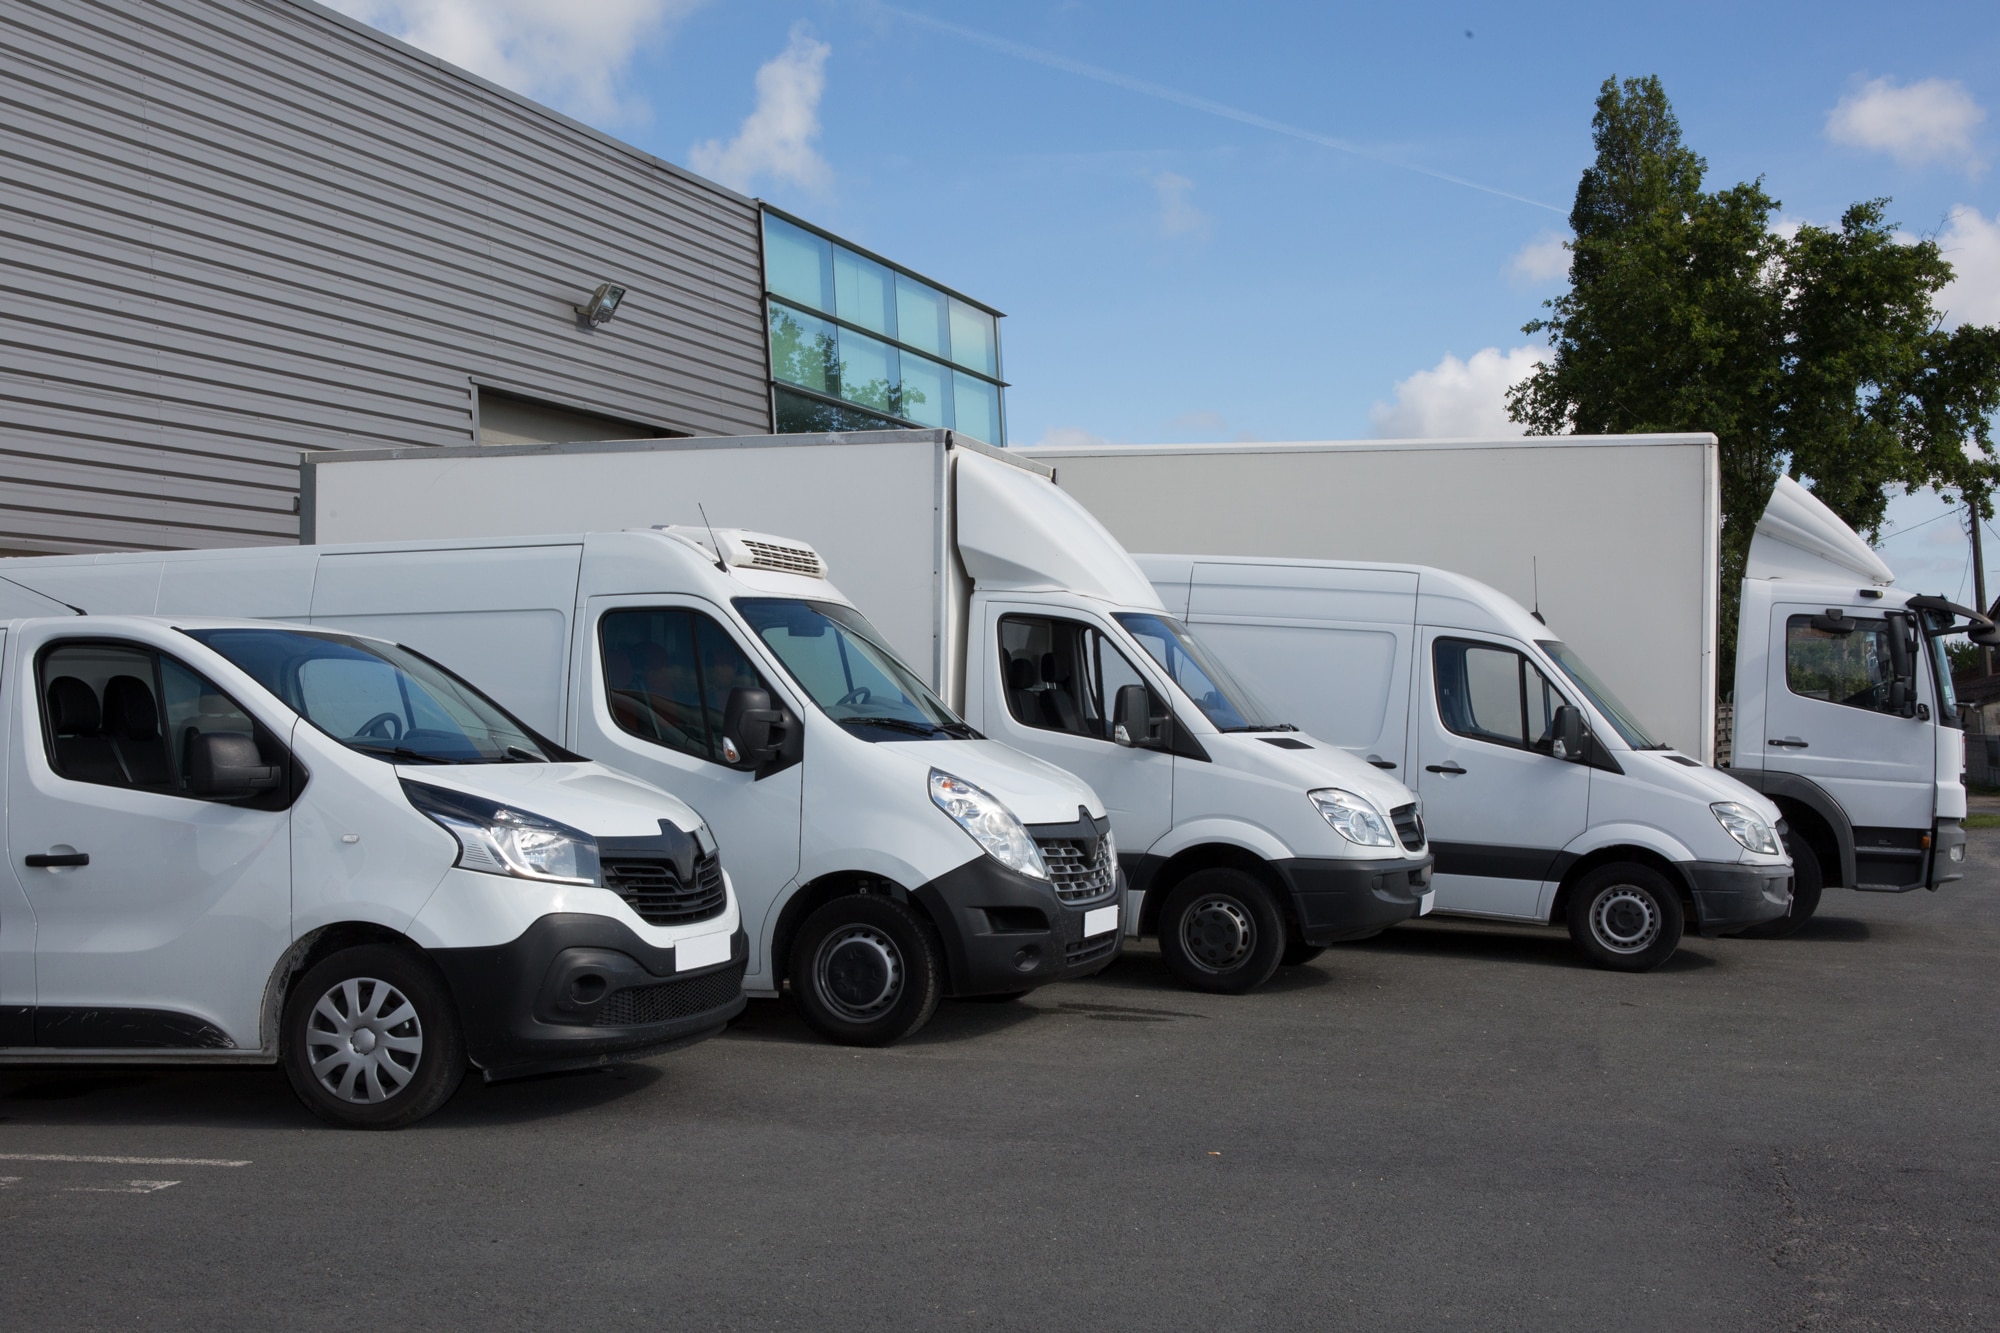 Fleet of white vans undefined trucks in different styles outside a business